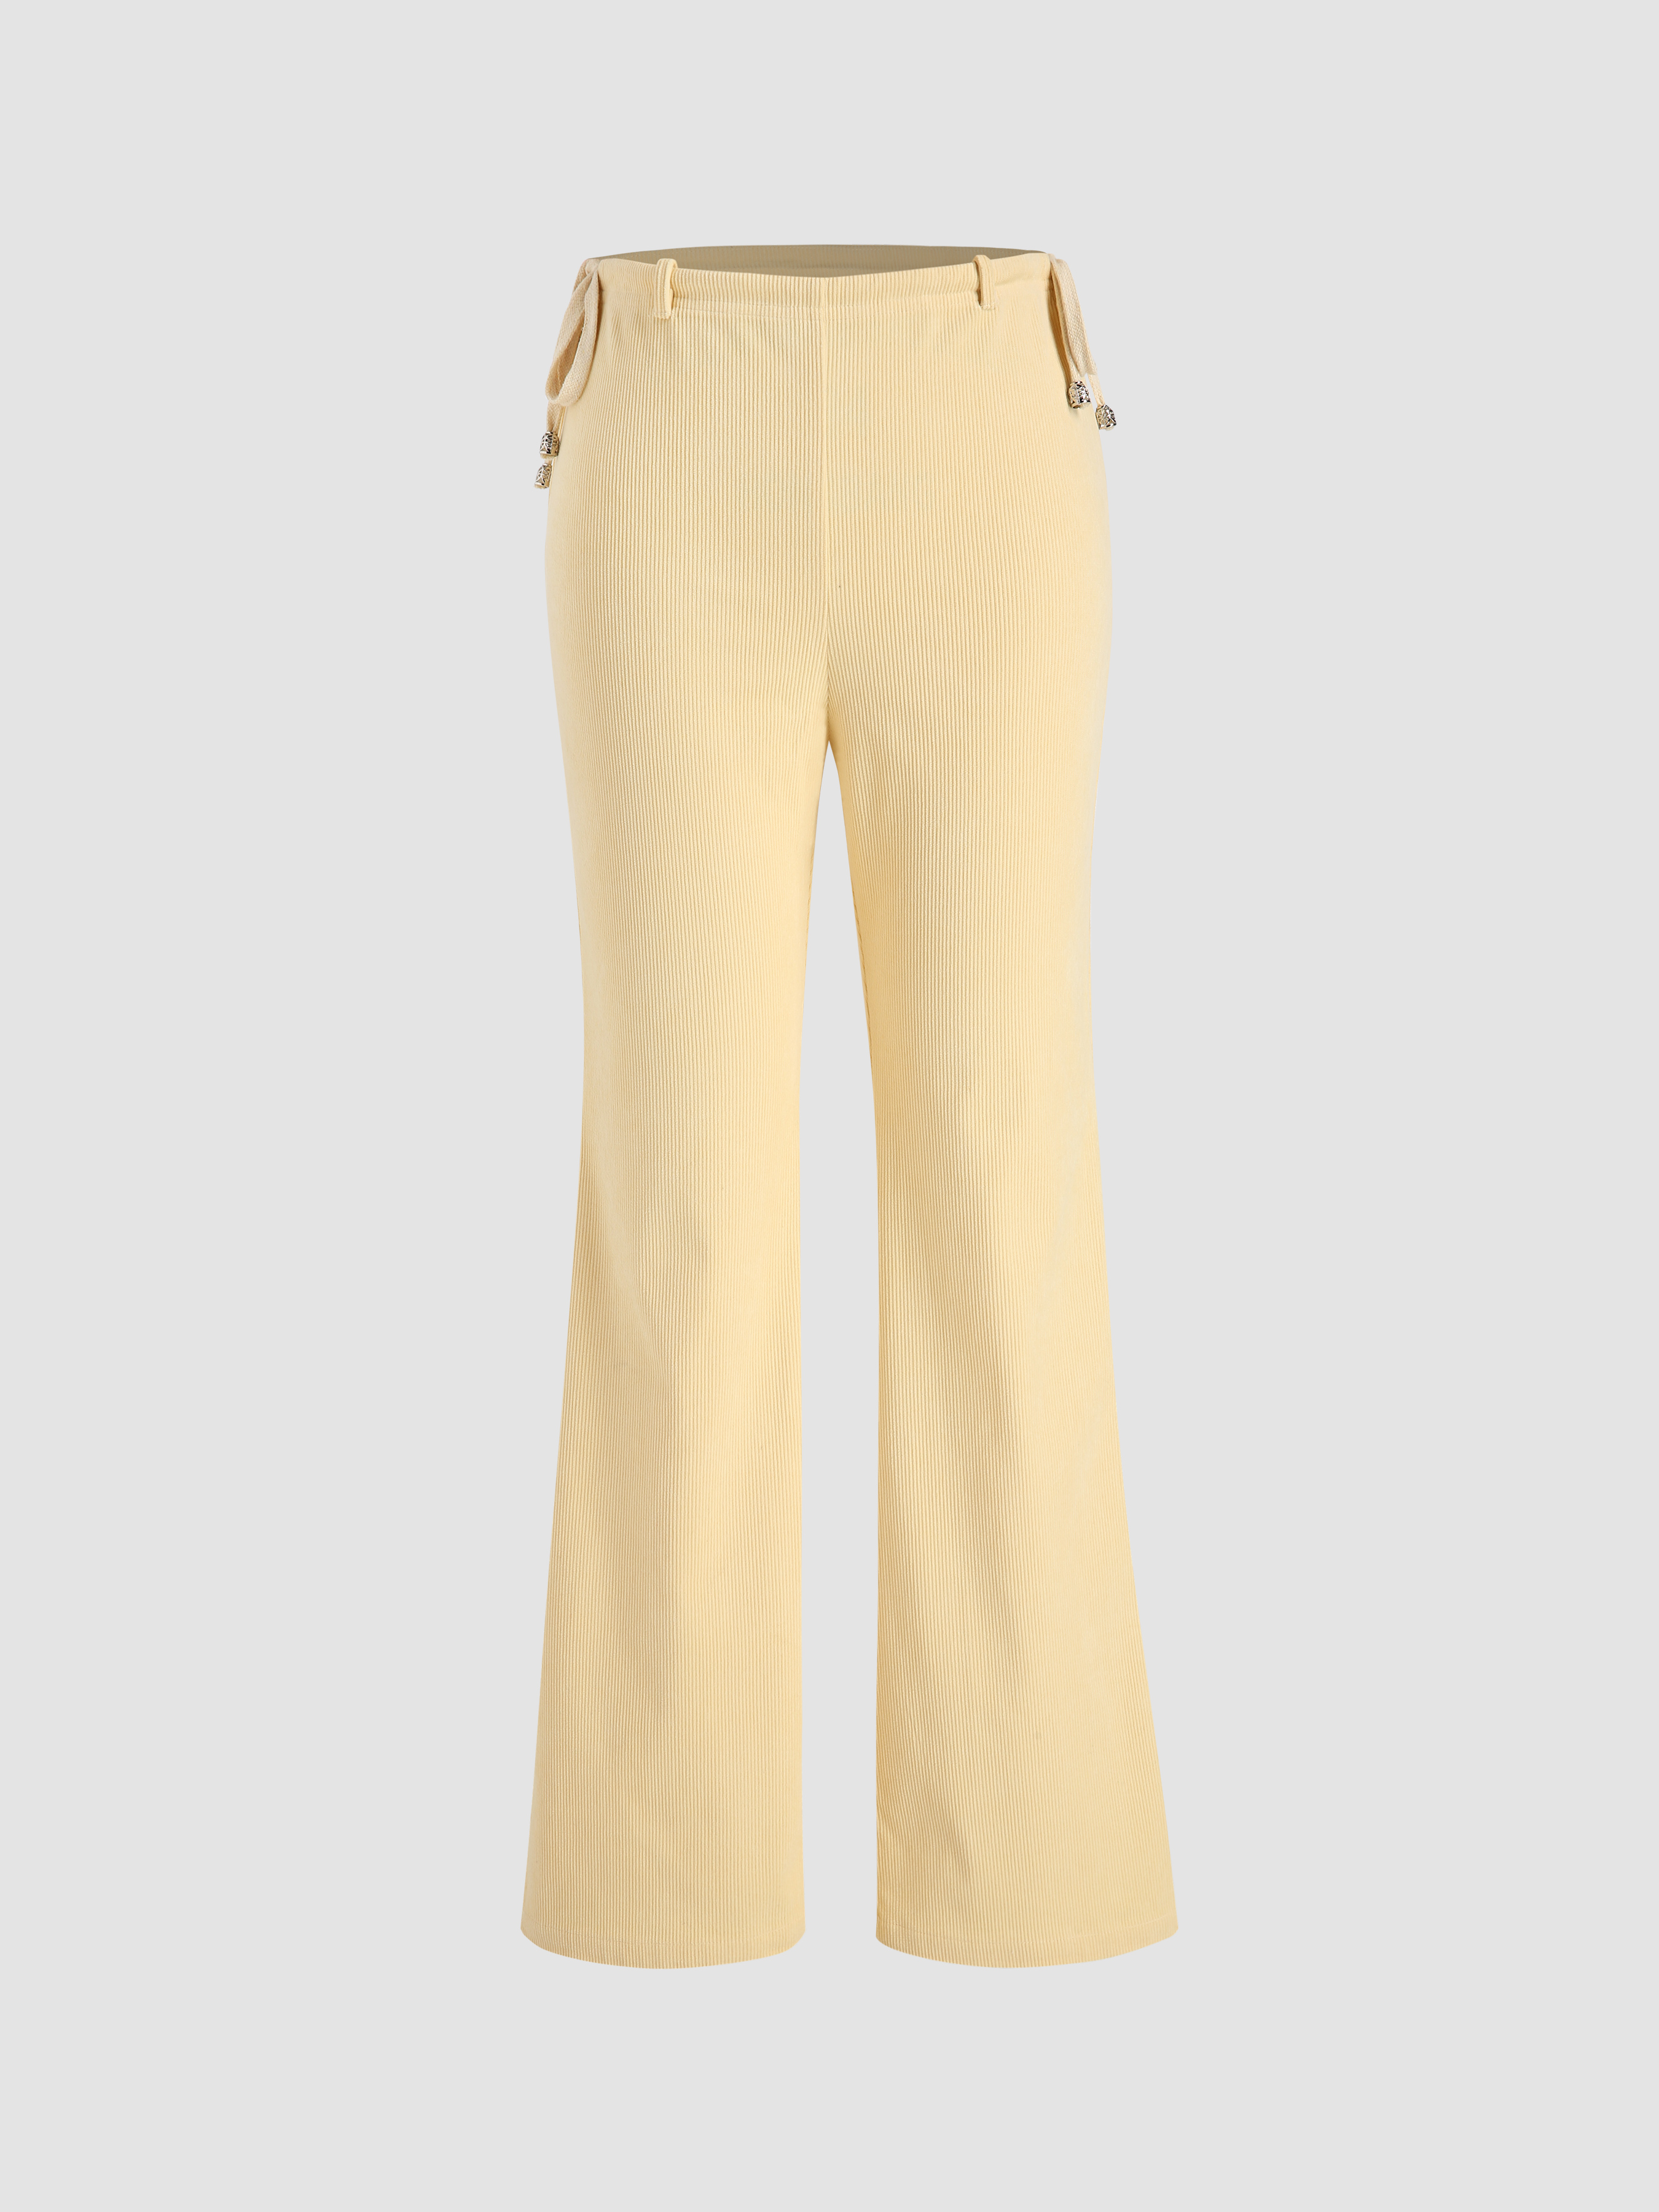 Bow Side Yellow Solid Flares - Cider